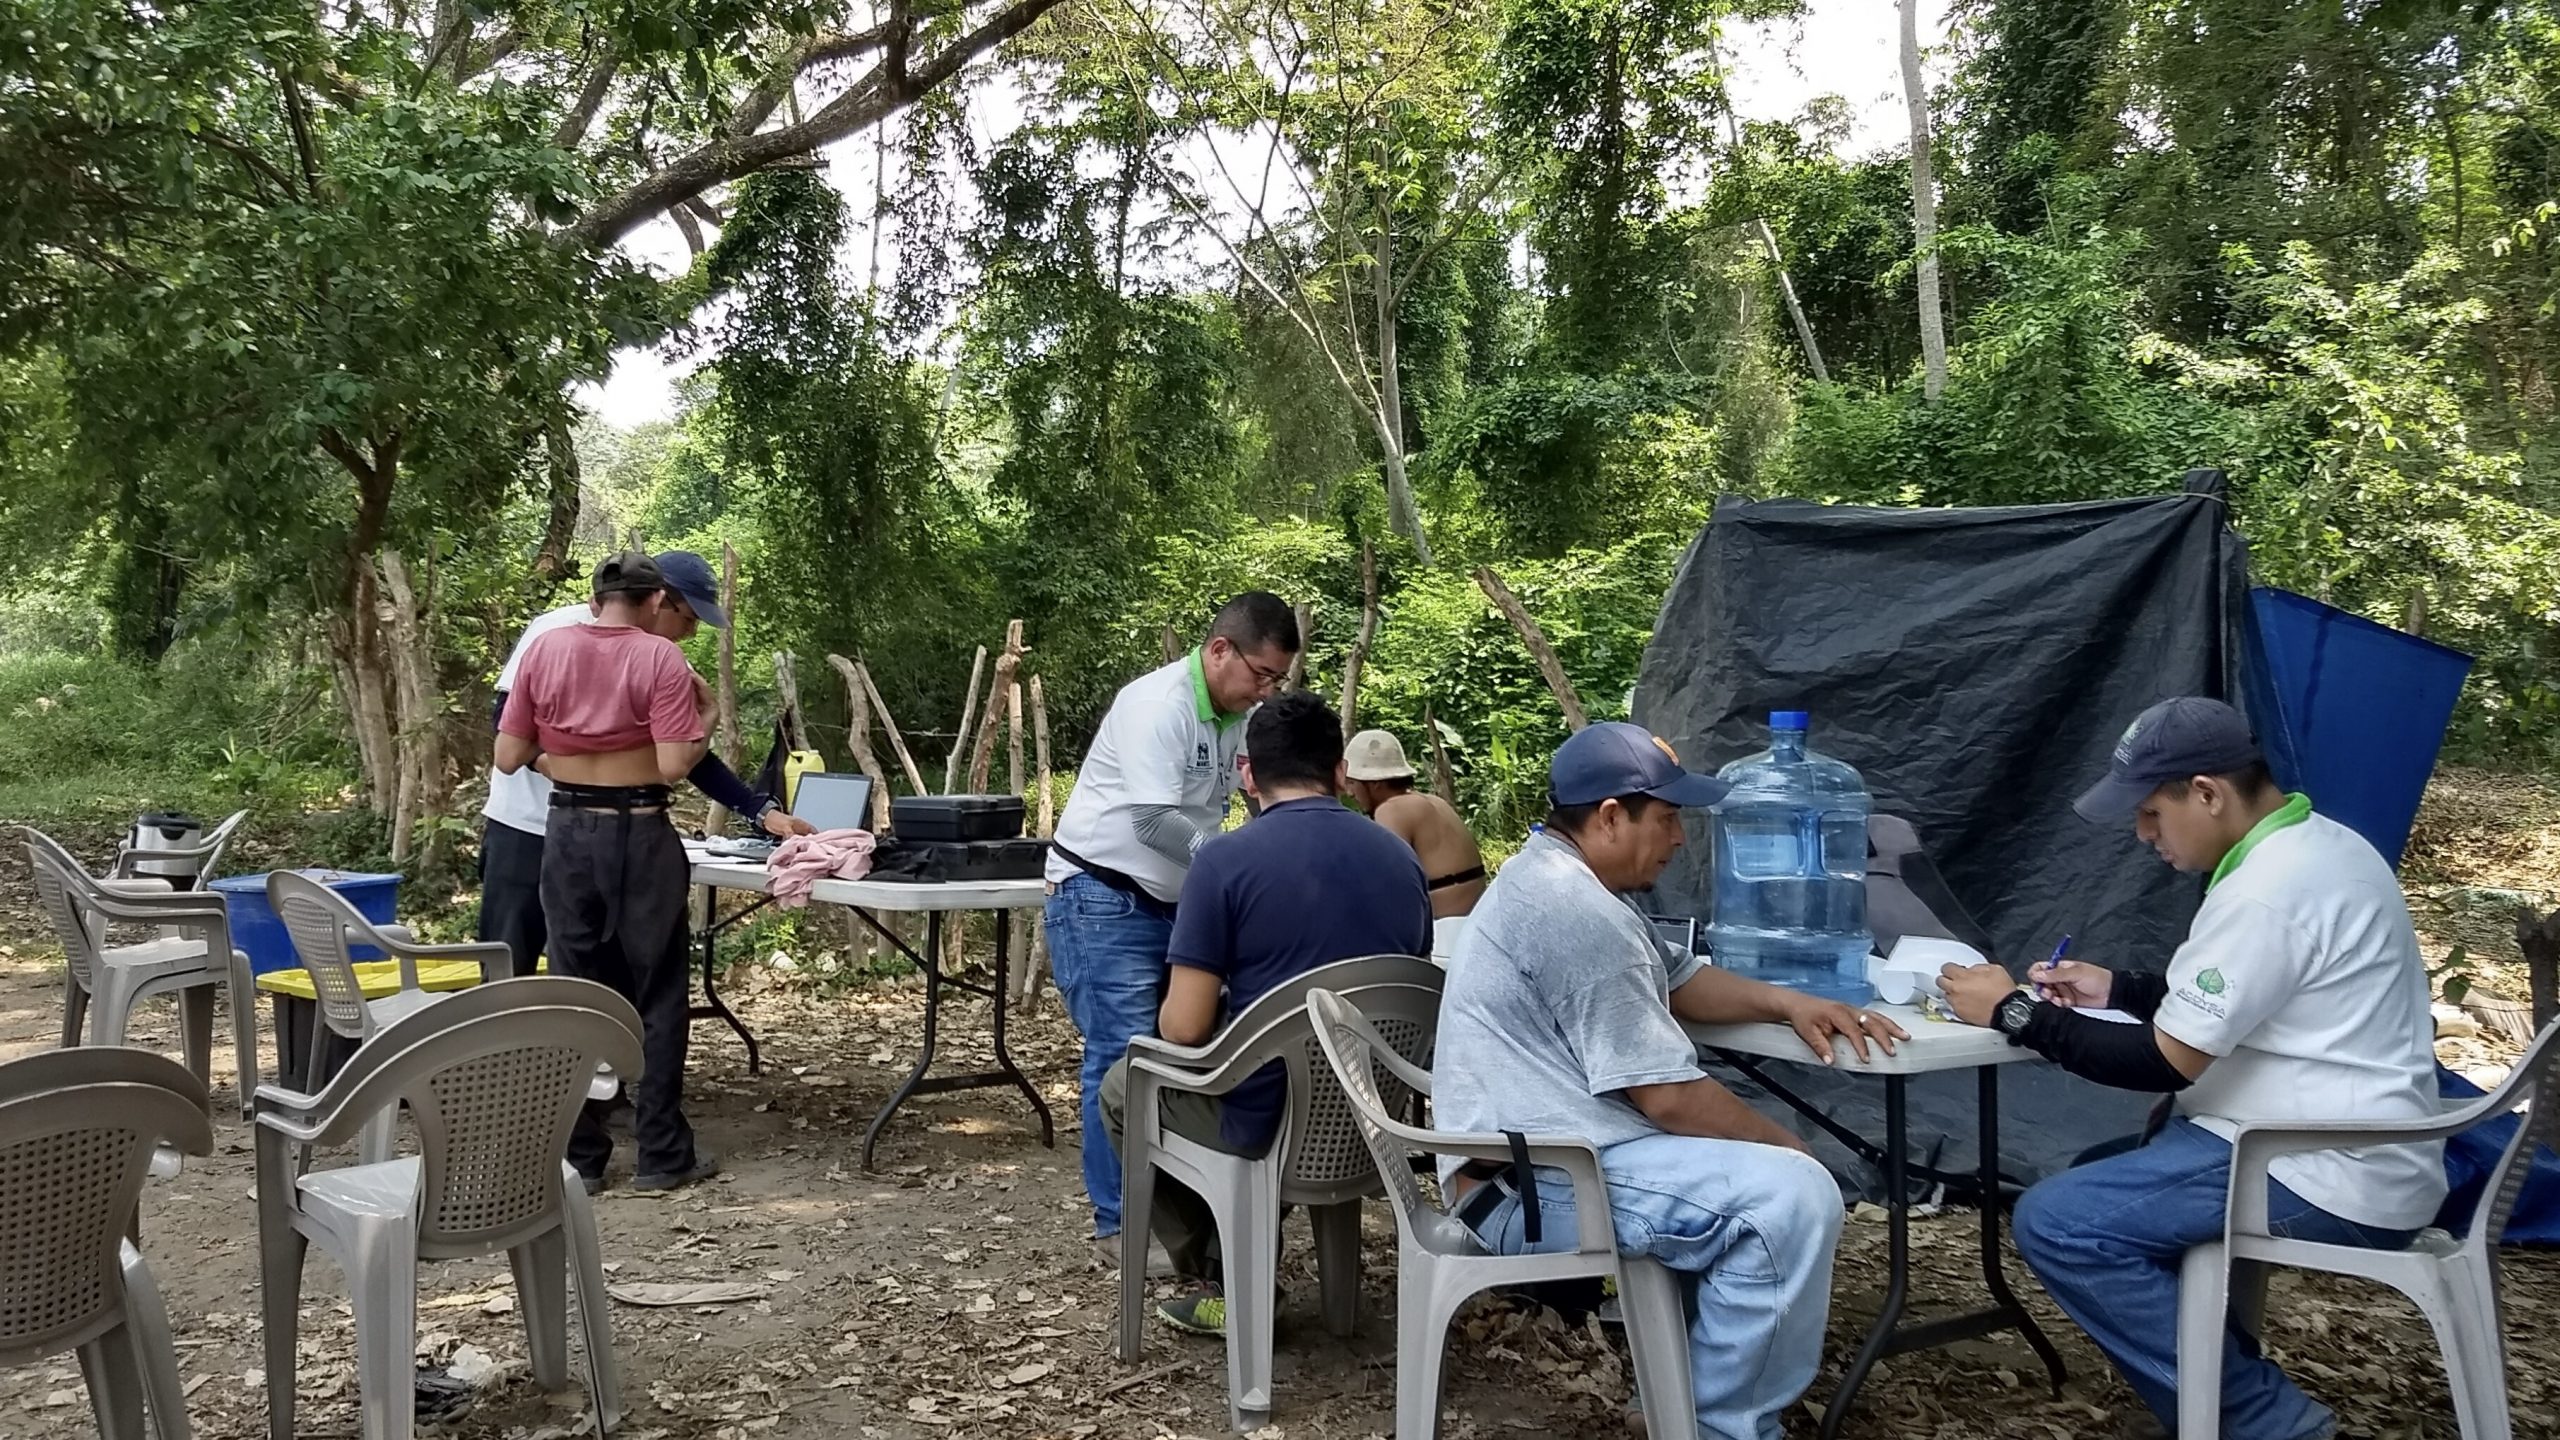 picture of fieldwork in Nicaragua. a participant has a device around his stomach, a second and third participants are sitting down while a team member monitors them, a fourth participant is being interviewed by a team member.